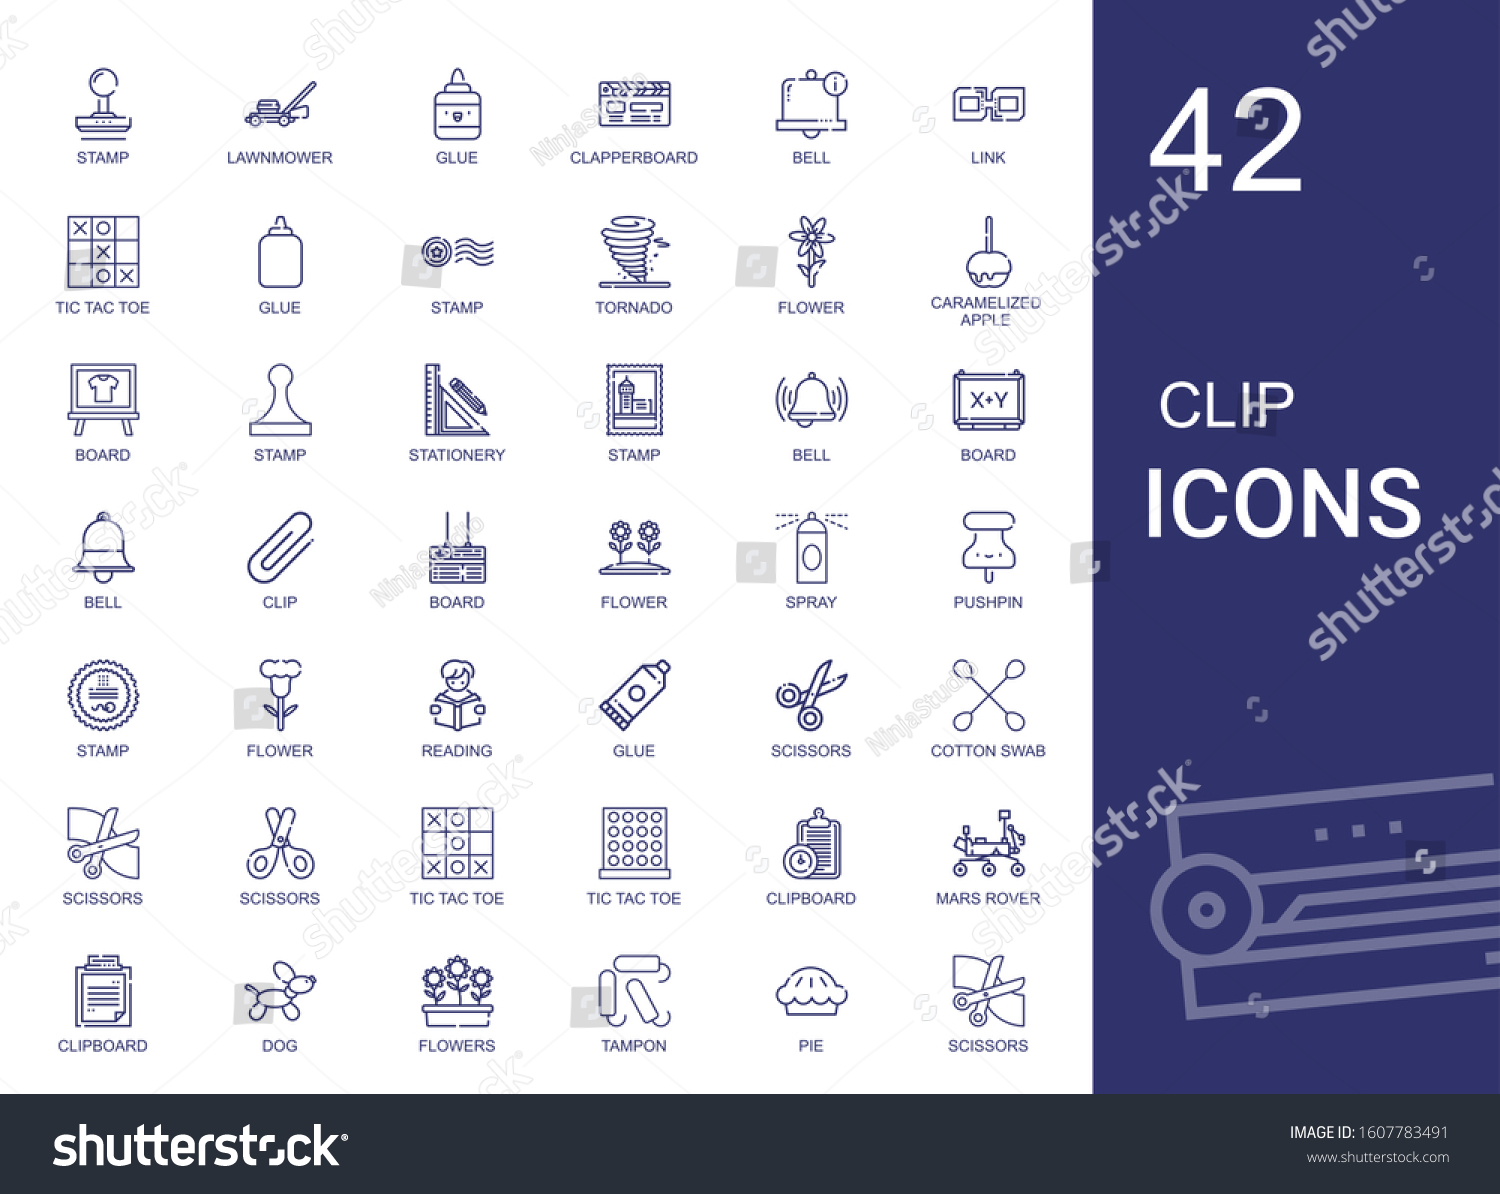 Clip Icons Set Collection Clip Stamp Stock Vector Royalty Free